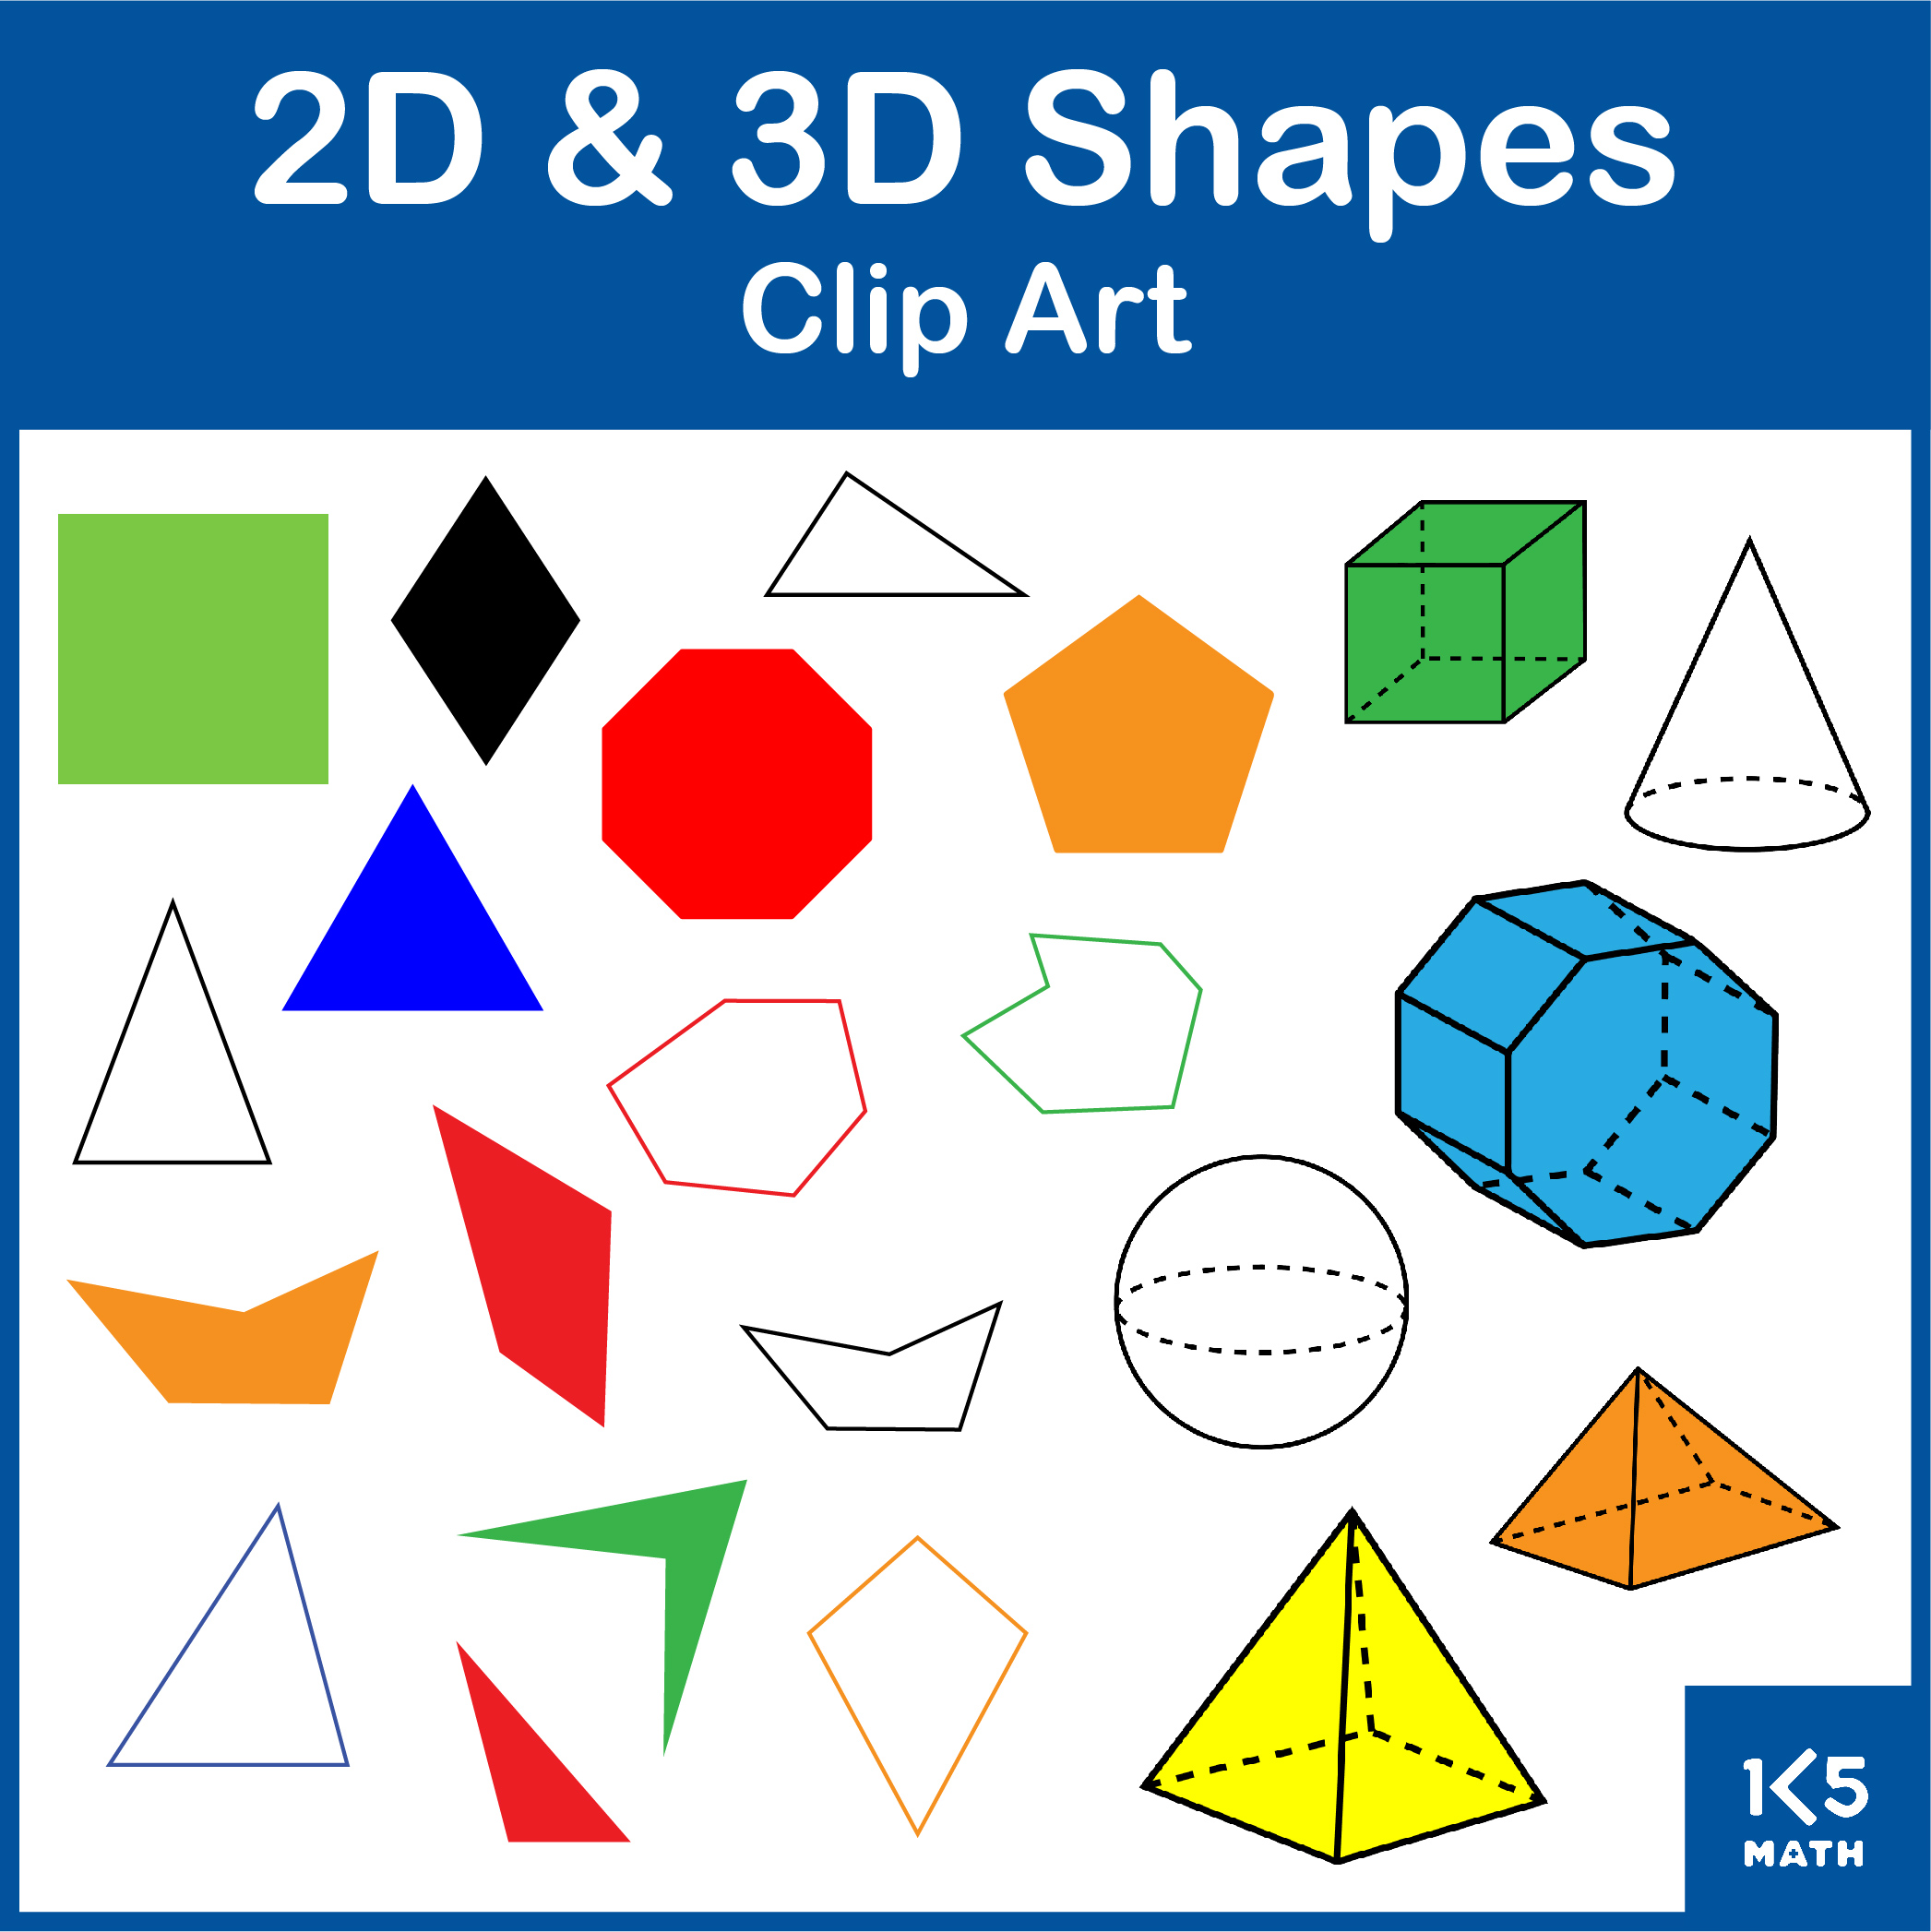 triangle objects clipart